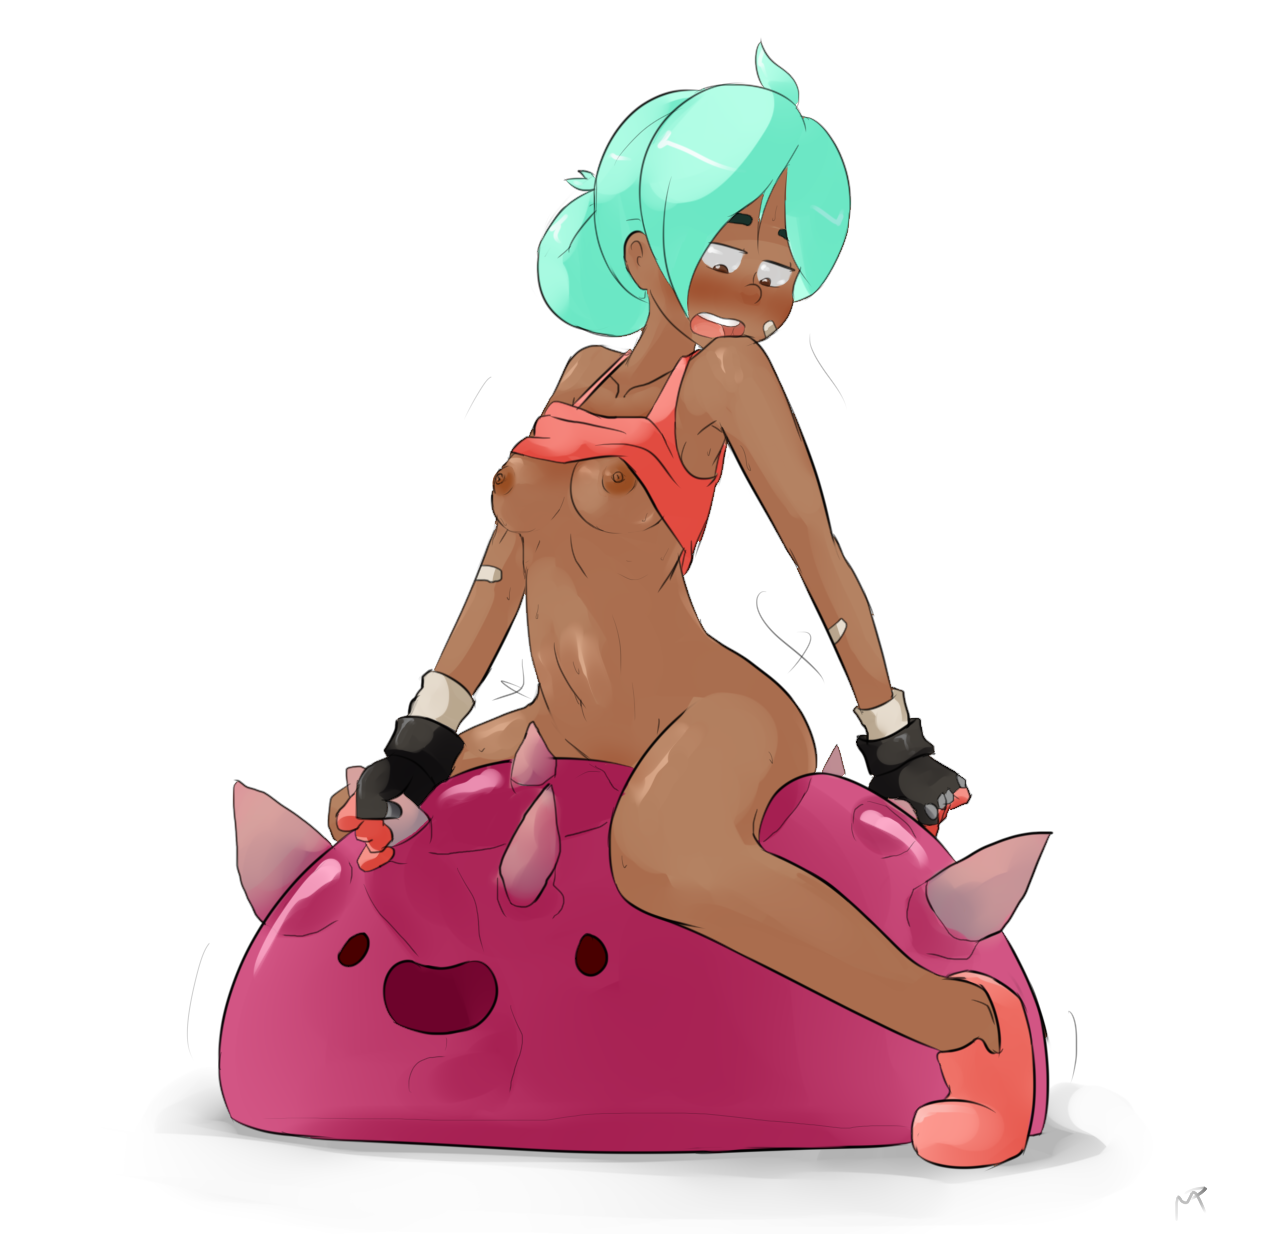 Slime rancher nude